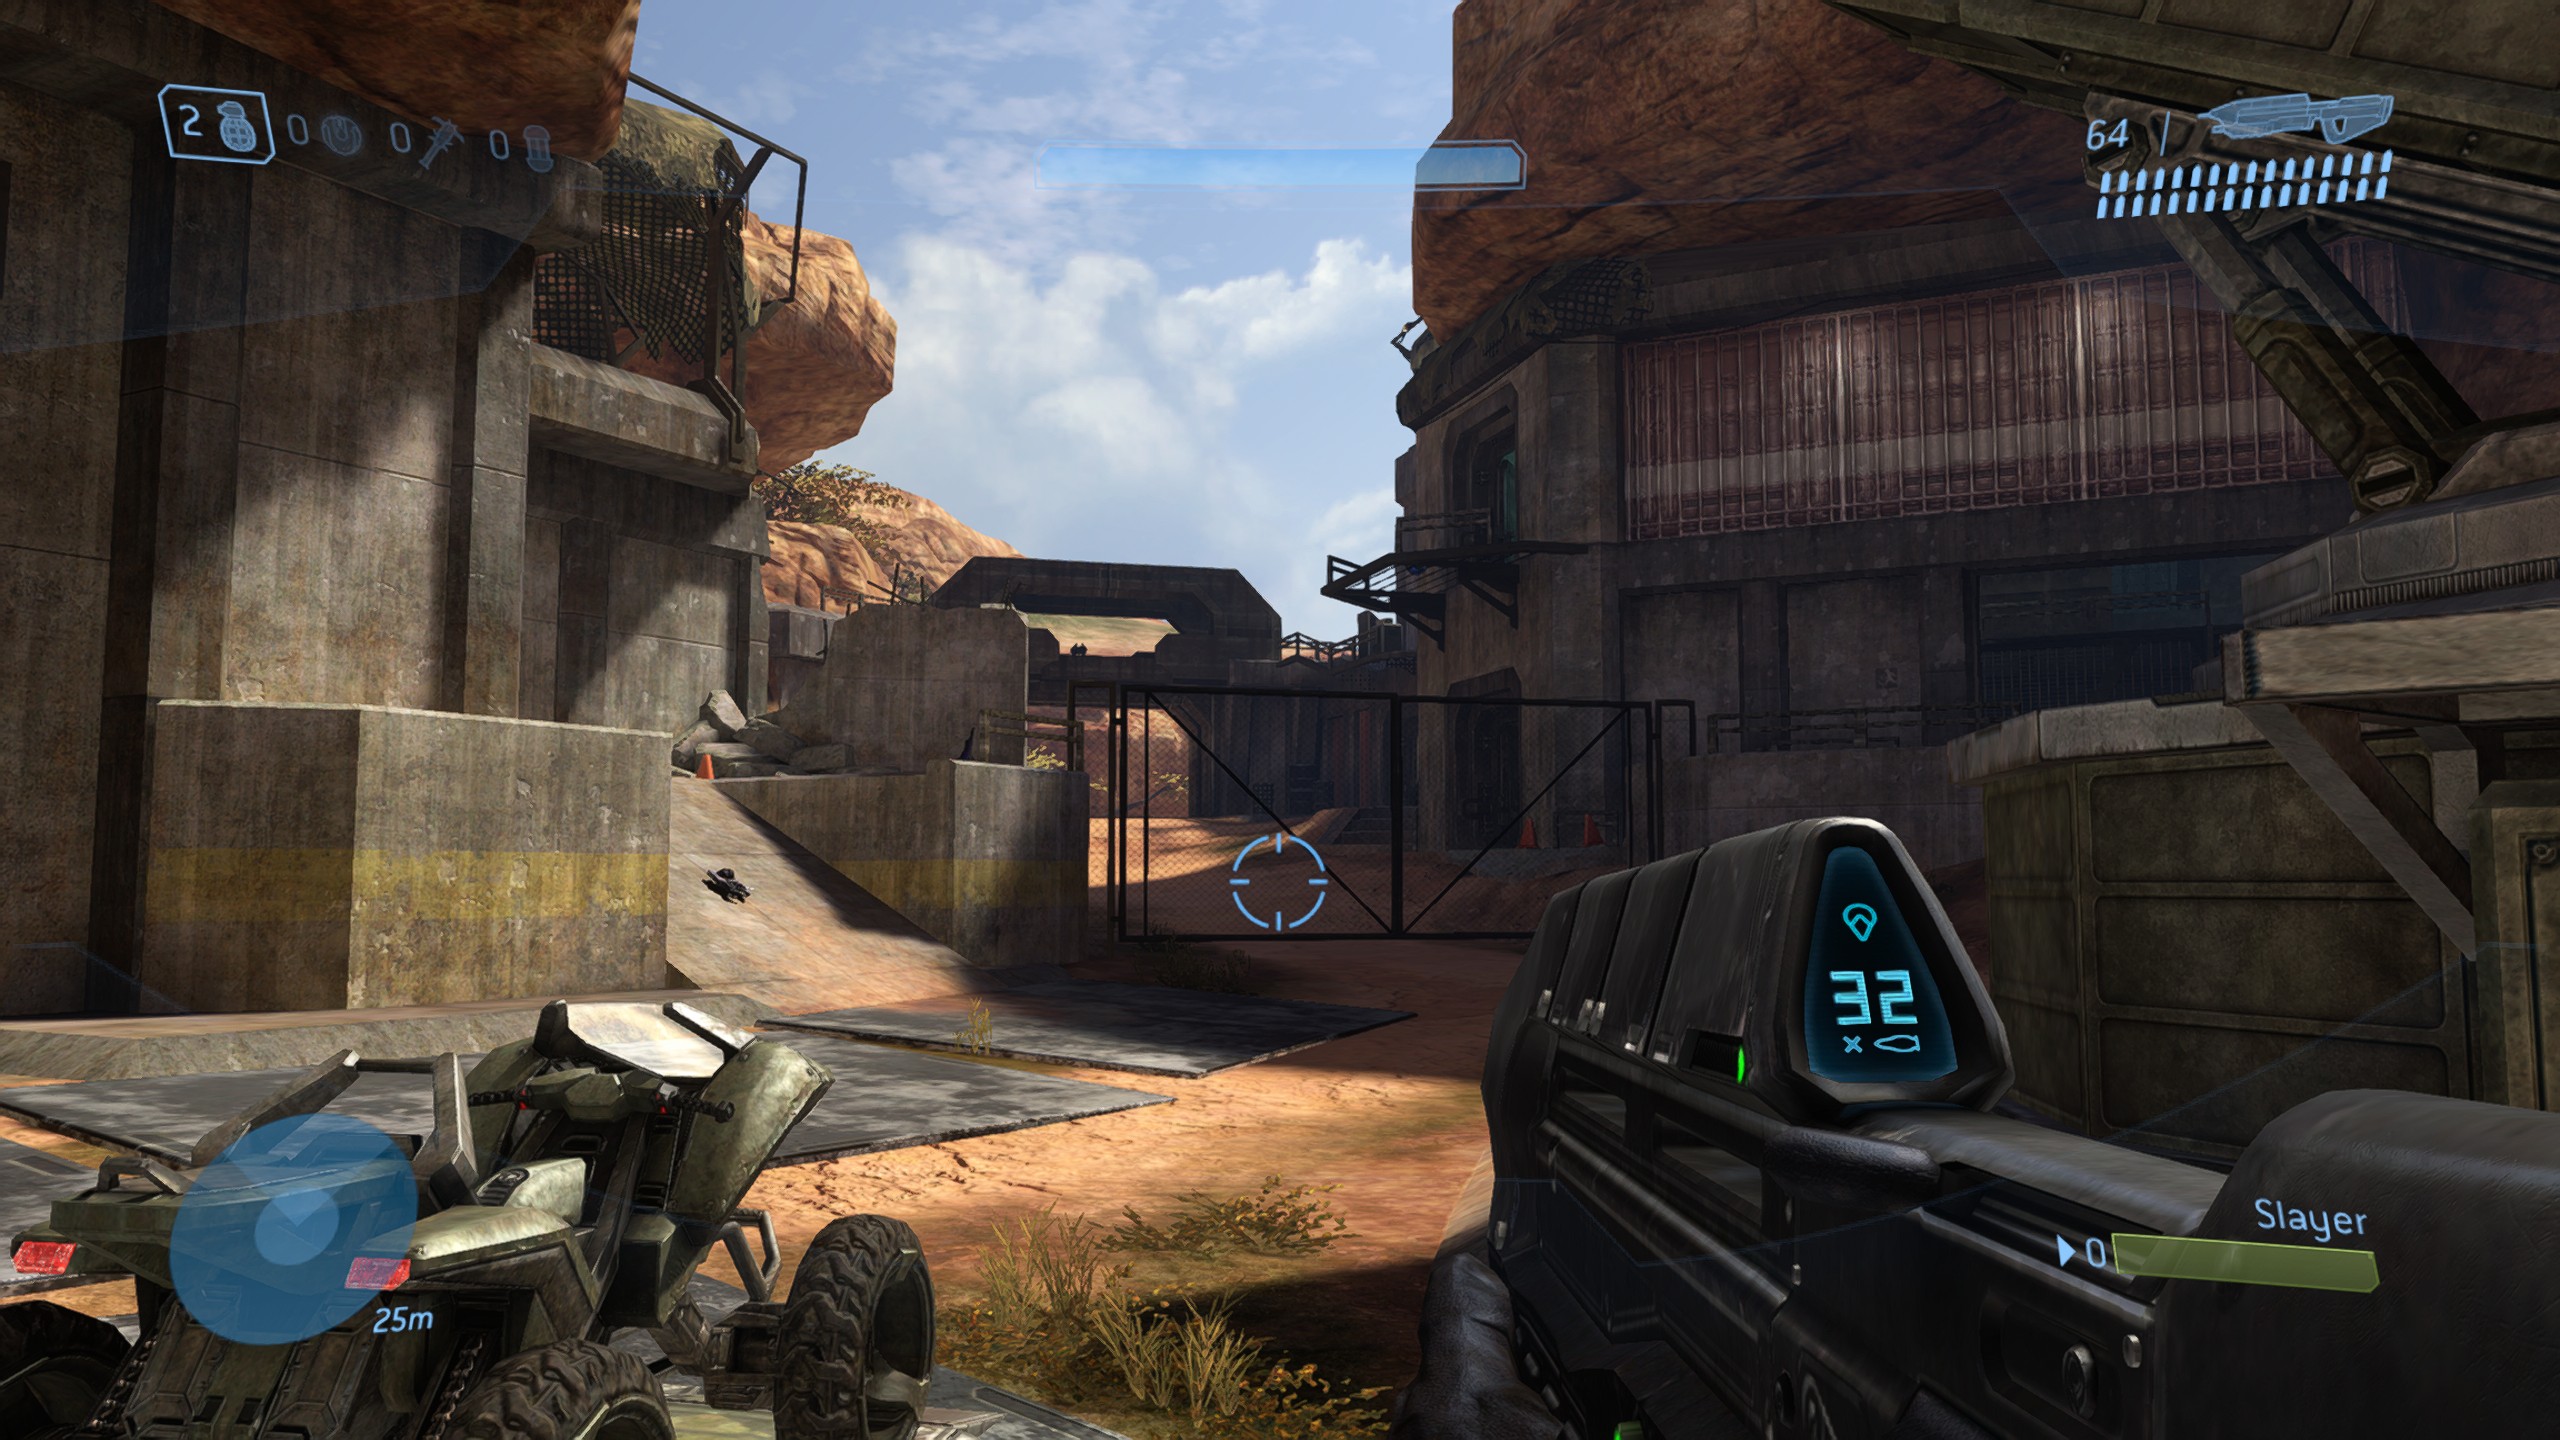 Halo 3 with 2x2 resolution scale, no in-game AA, extreme quality FXAA, 2304x1280 upscaled to 2560x1440 by FSR